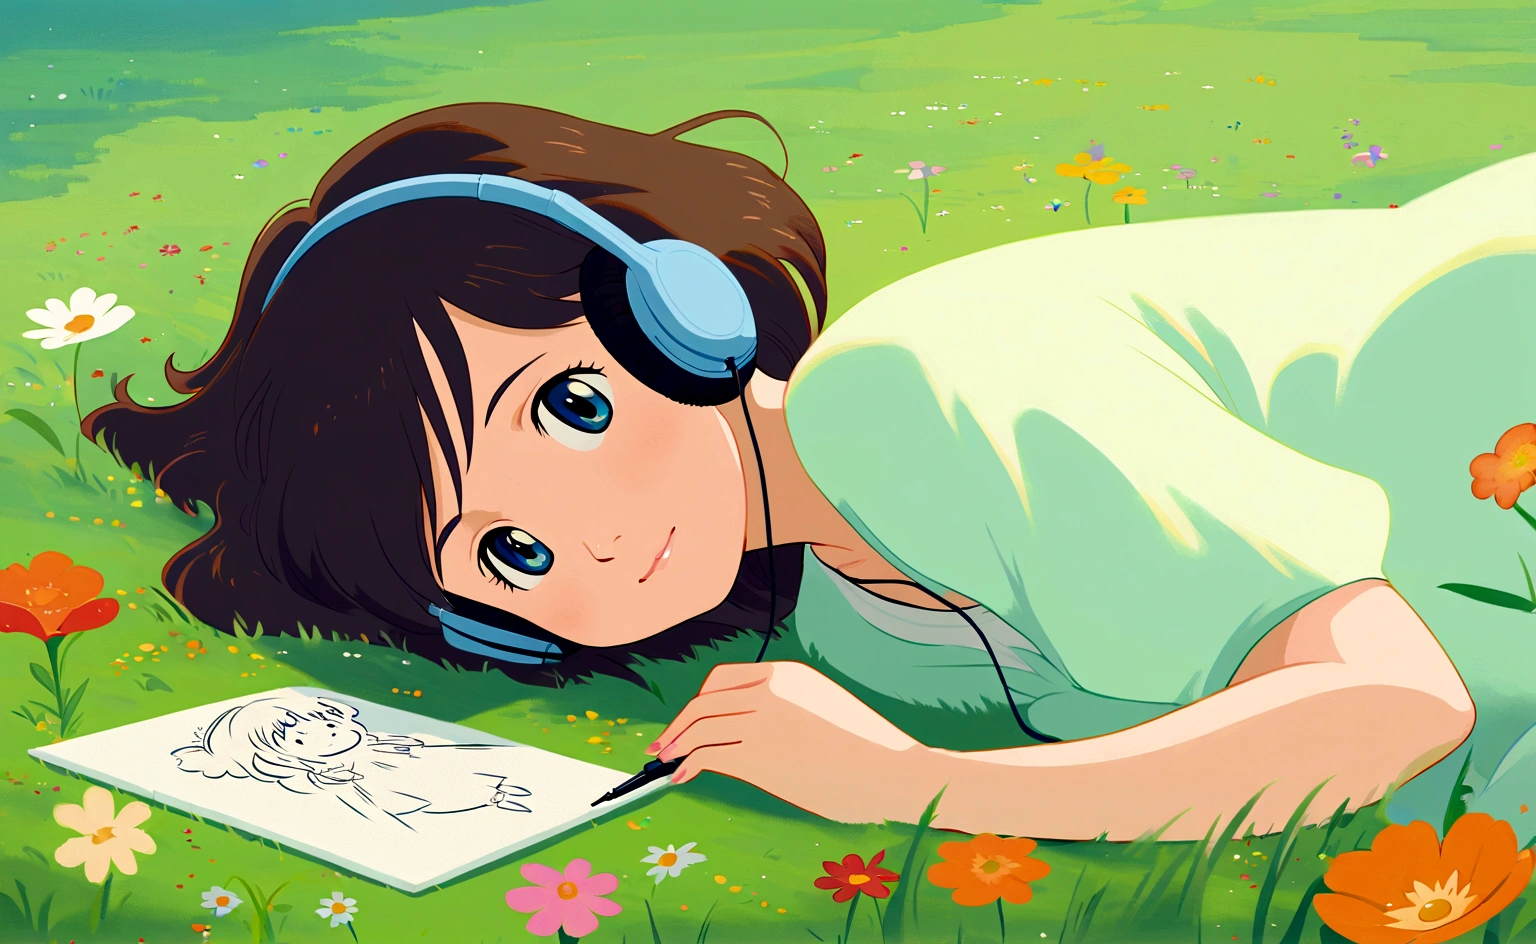 a cute girl lying on the grass in a meadow full of beautiful flowers, simple, drawing, listening to music, Studio Ghibli style, grass sway to the side, ghibli studio inspired, whimsical, airy, calm, serene, chill, ghibli, anime, ethereal